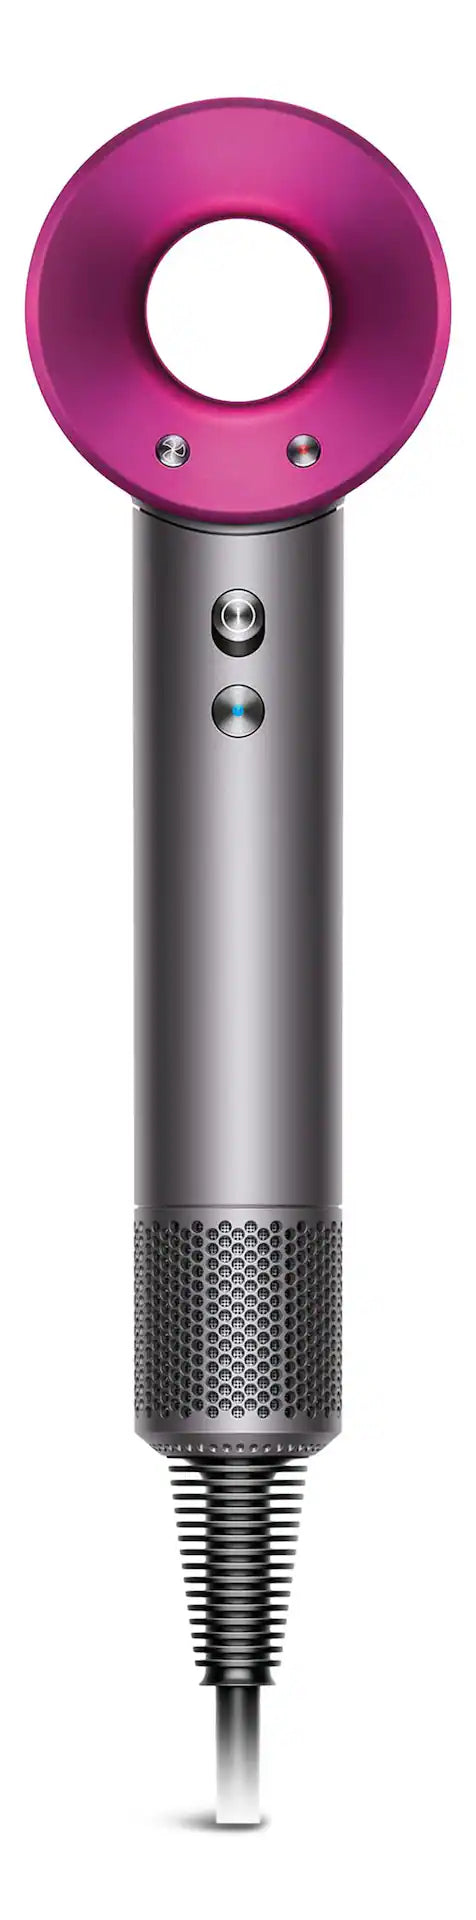 Refurbished Dyson Supersonic™ Hair Dryer